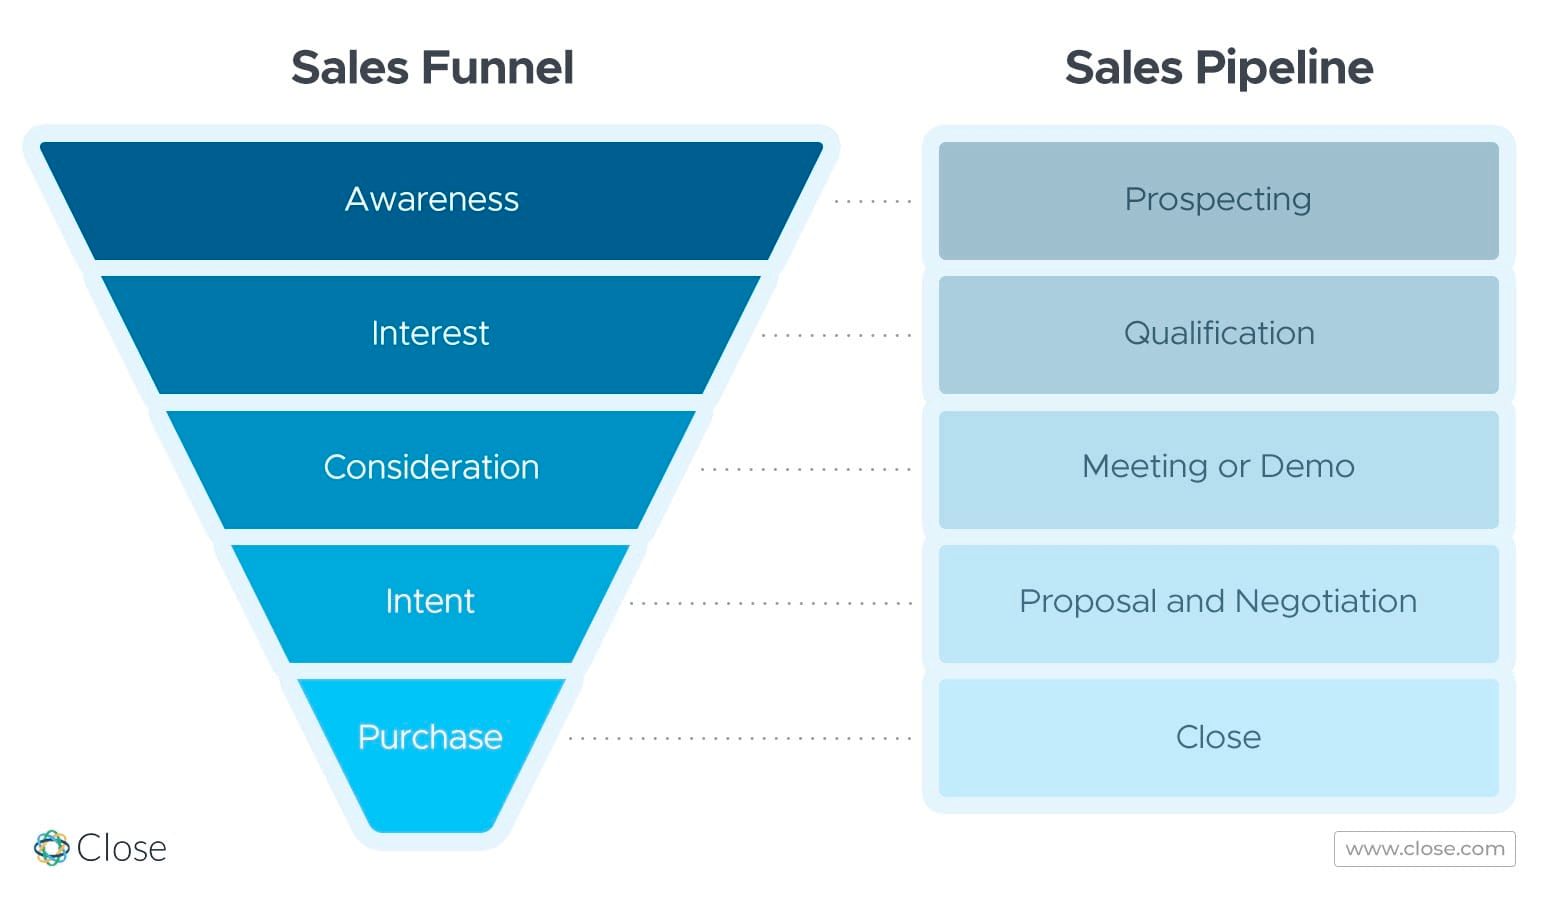 Set a Threshold for Each Stage of Your Sales Pipeline